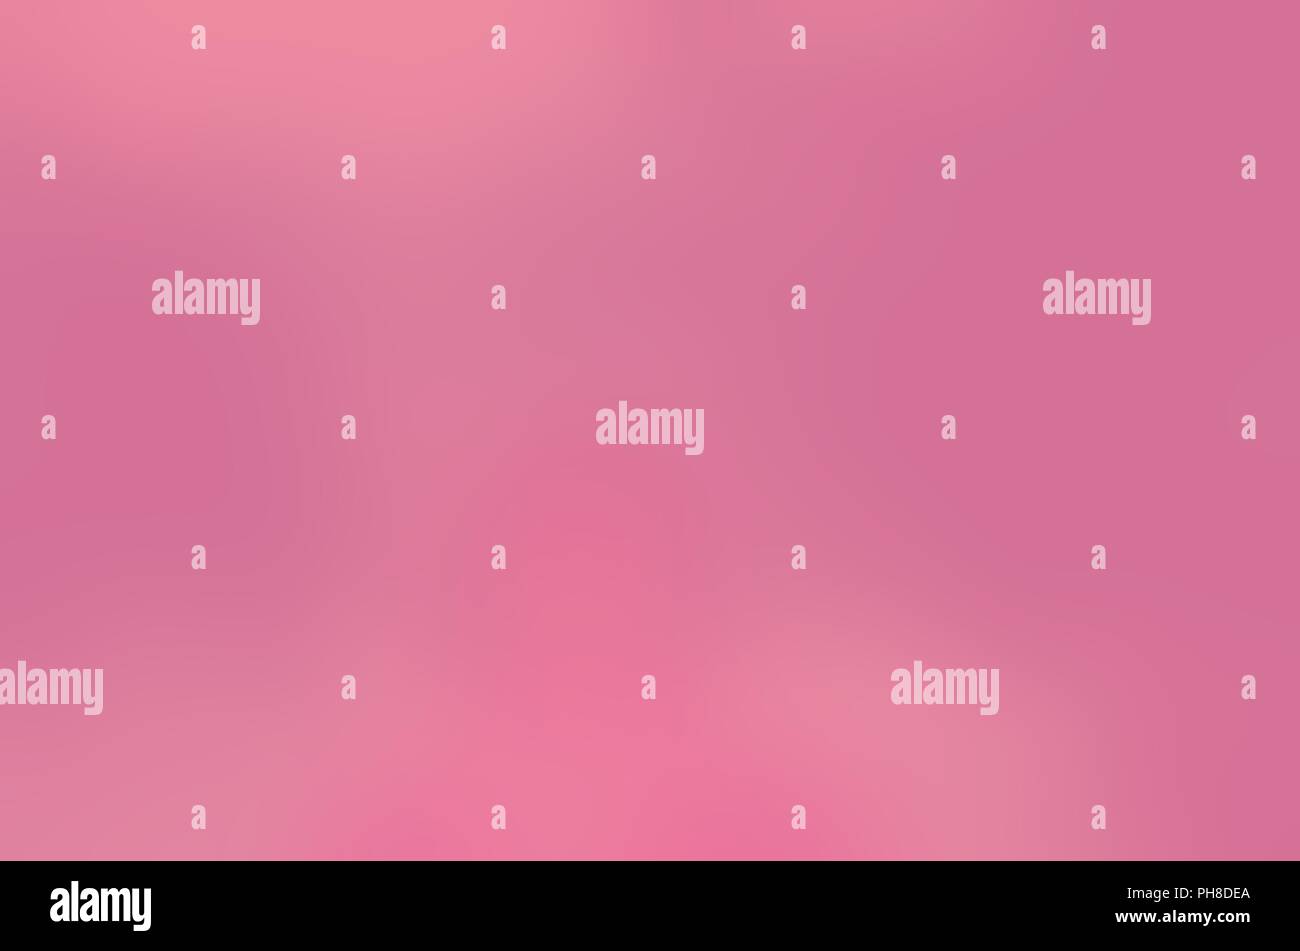 Aesthetic minimal cute pastel pink wallpaper with abstract